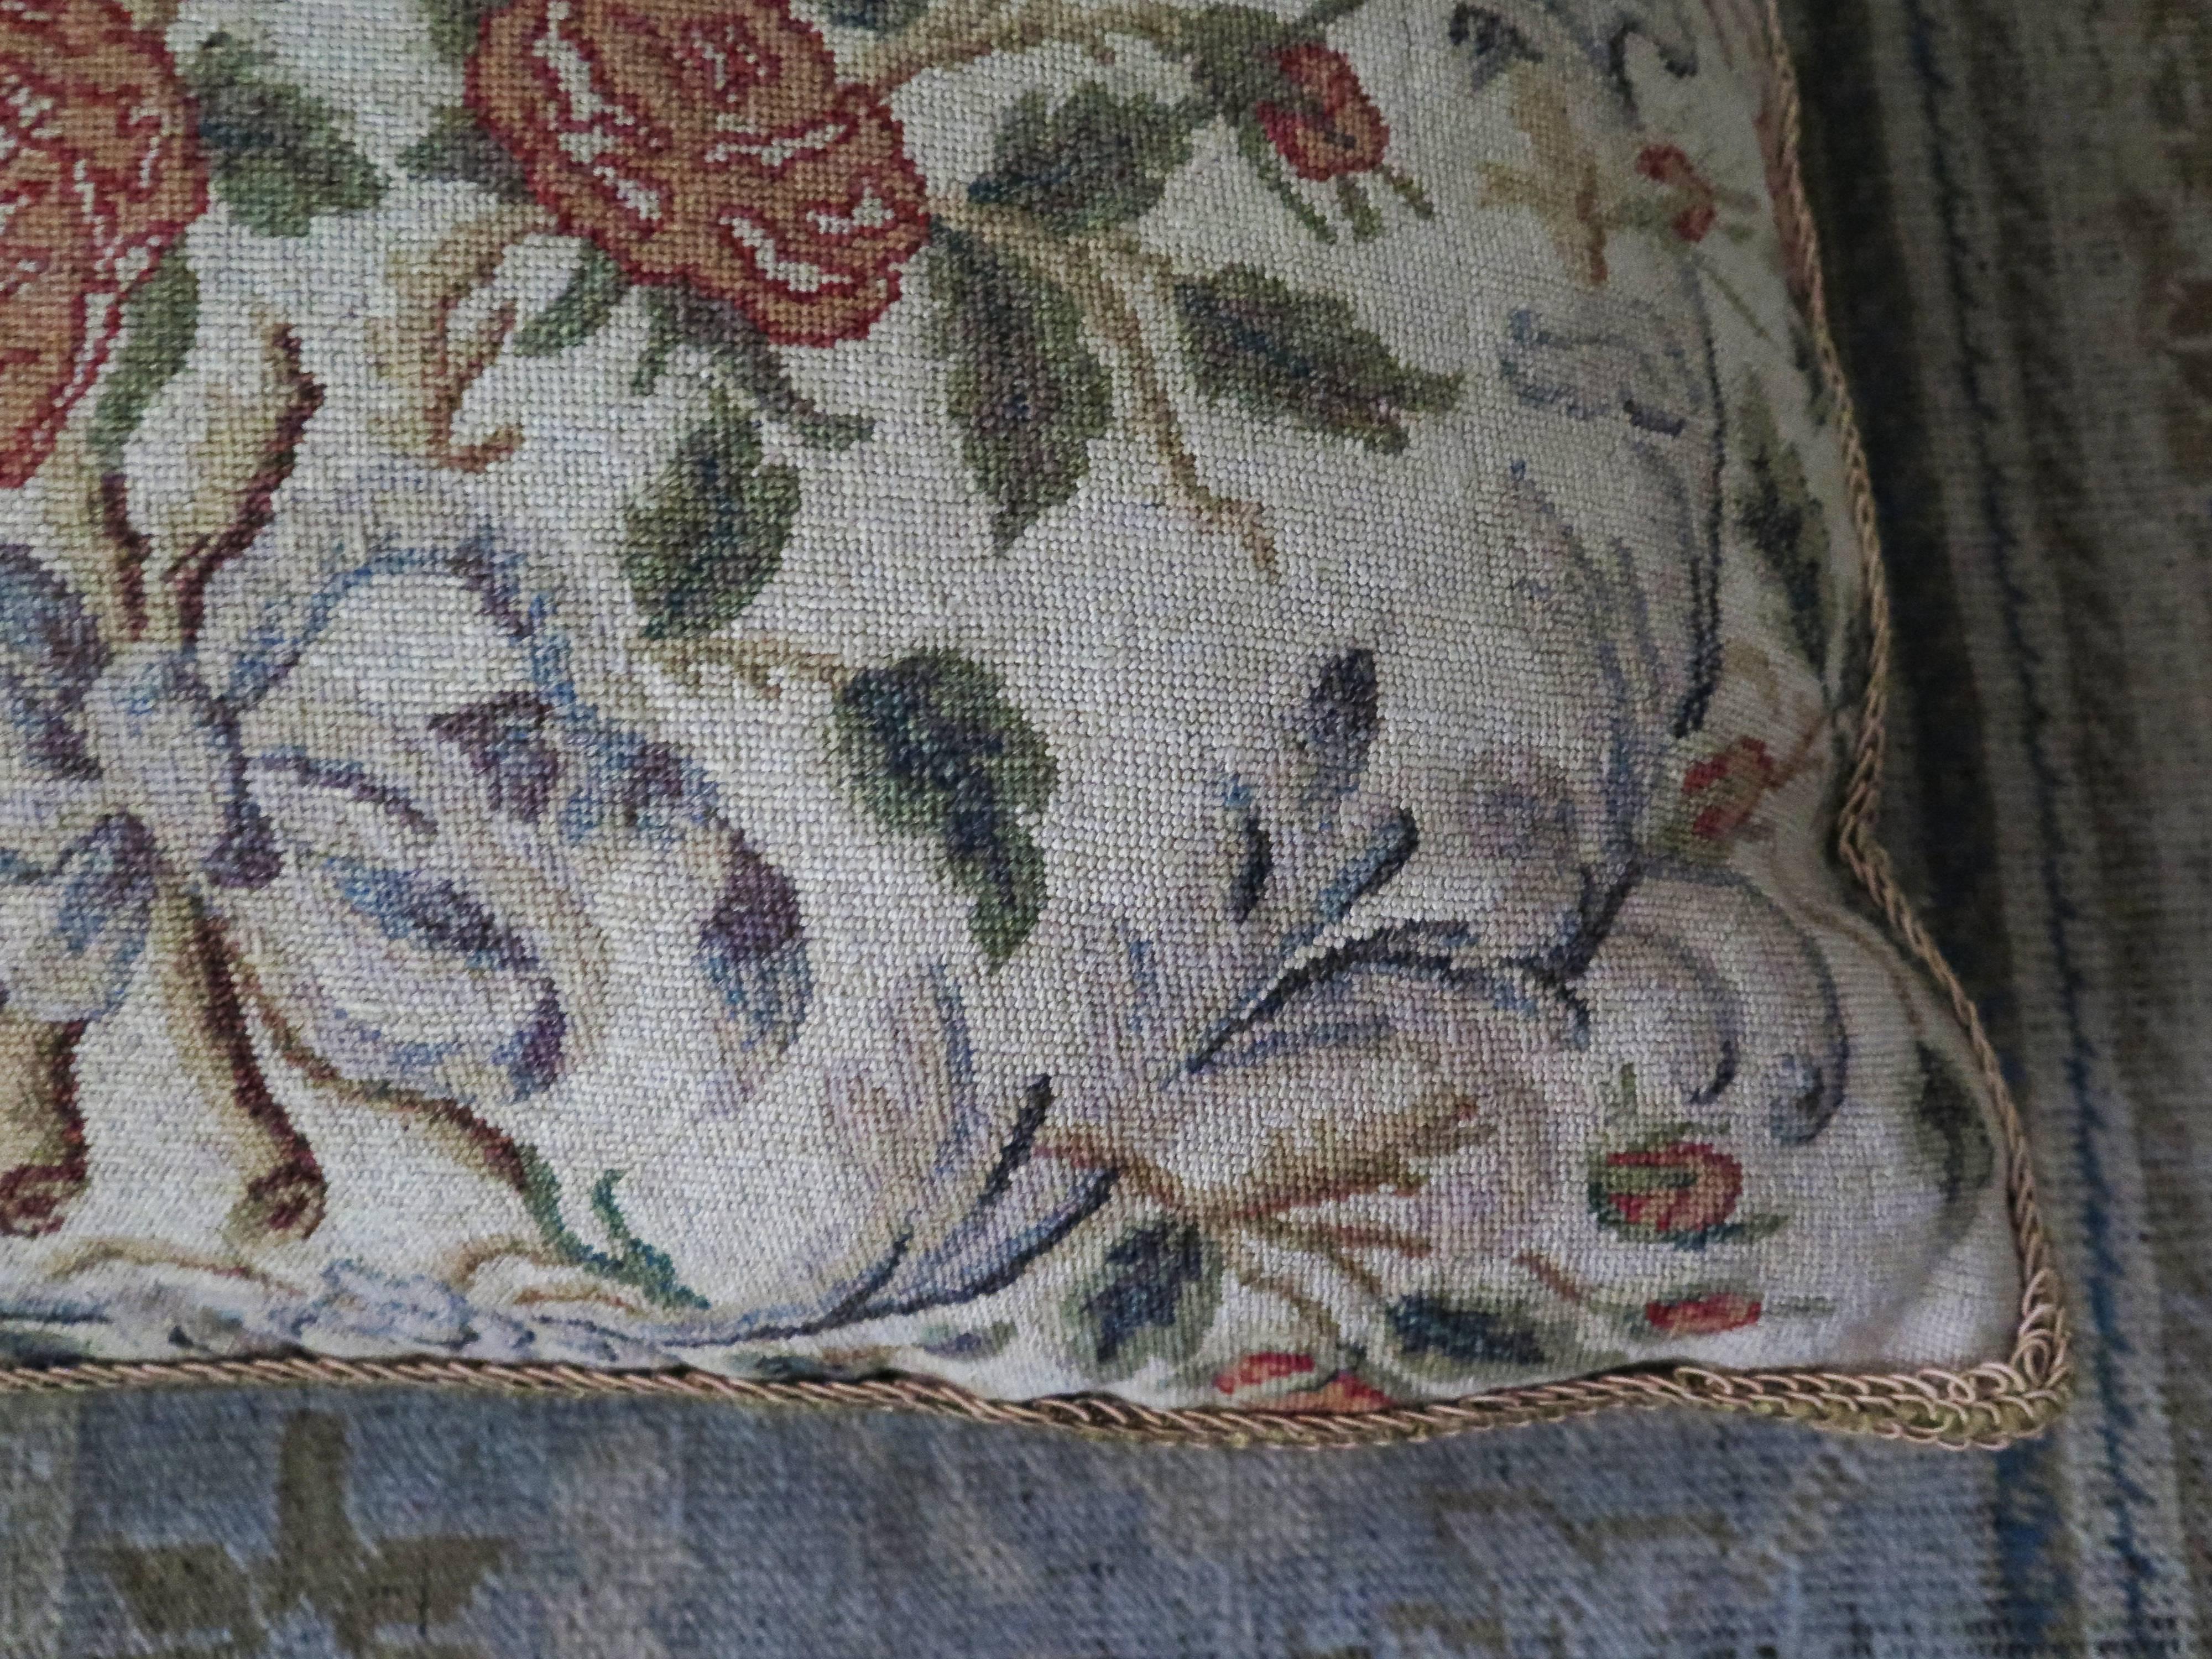 Maison Maison 19th Century Needlepoint Pillow In Excellent Condition For Sale In Houston, TX